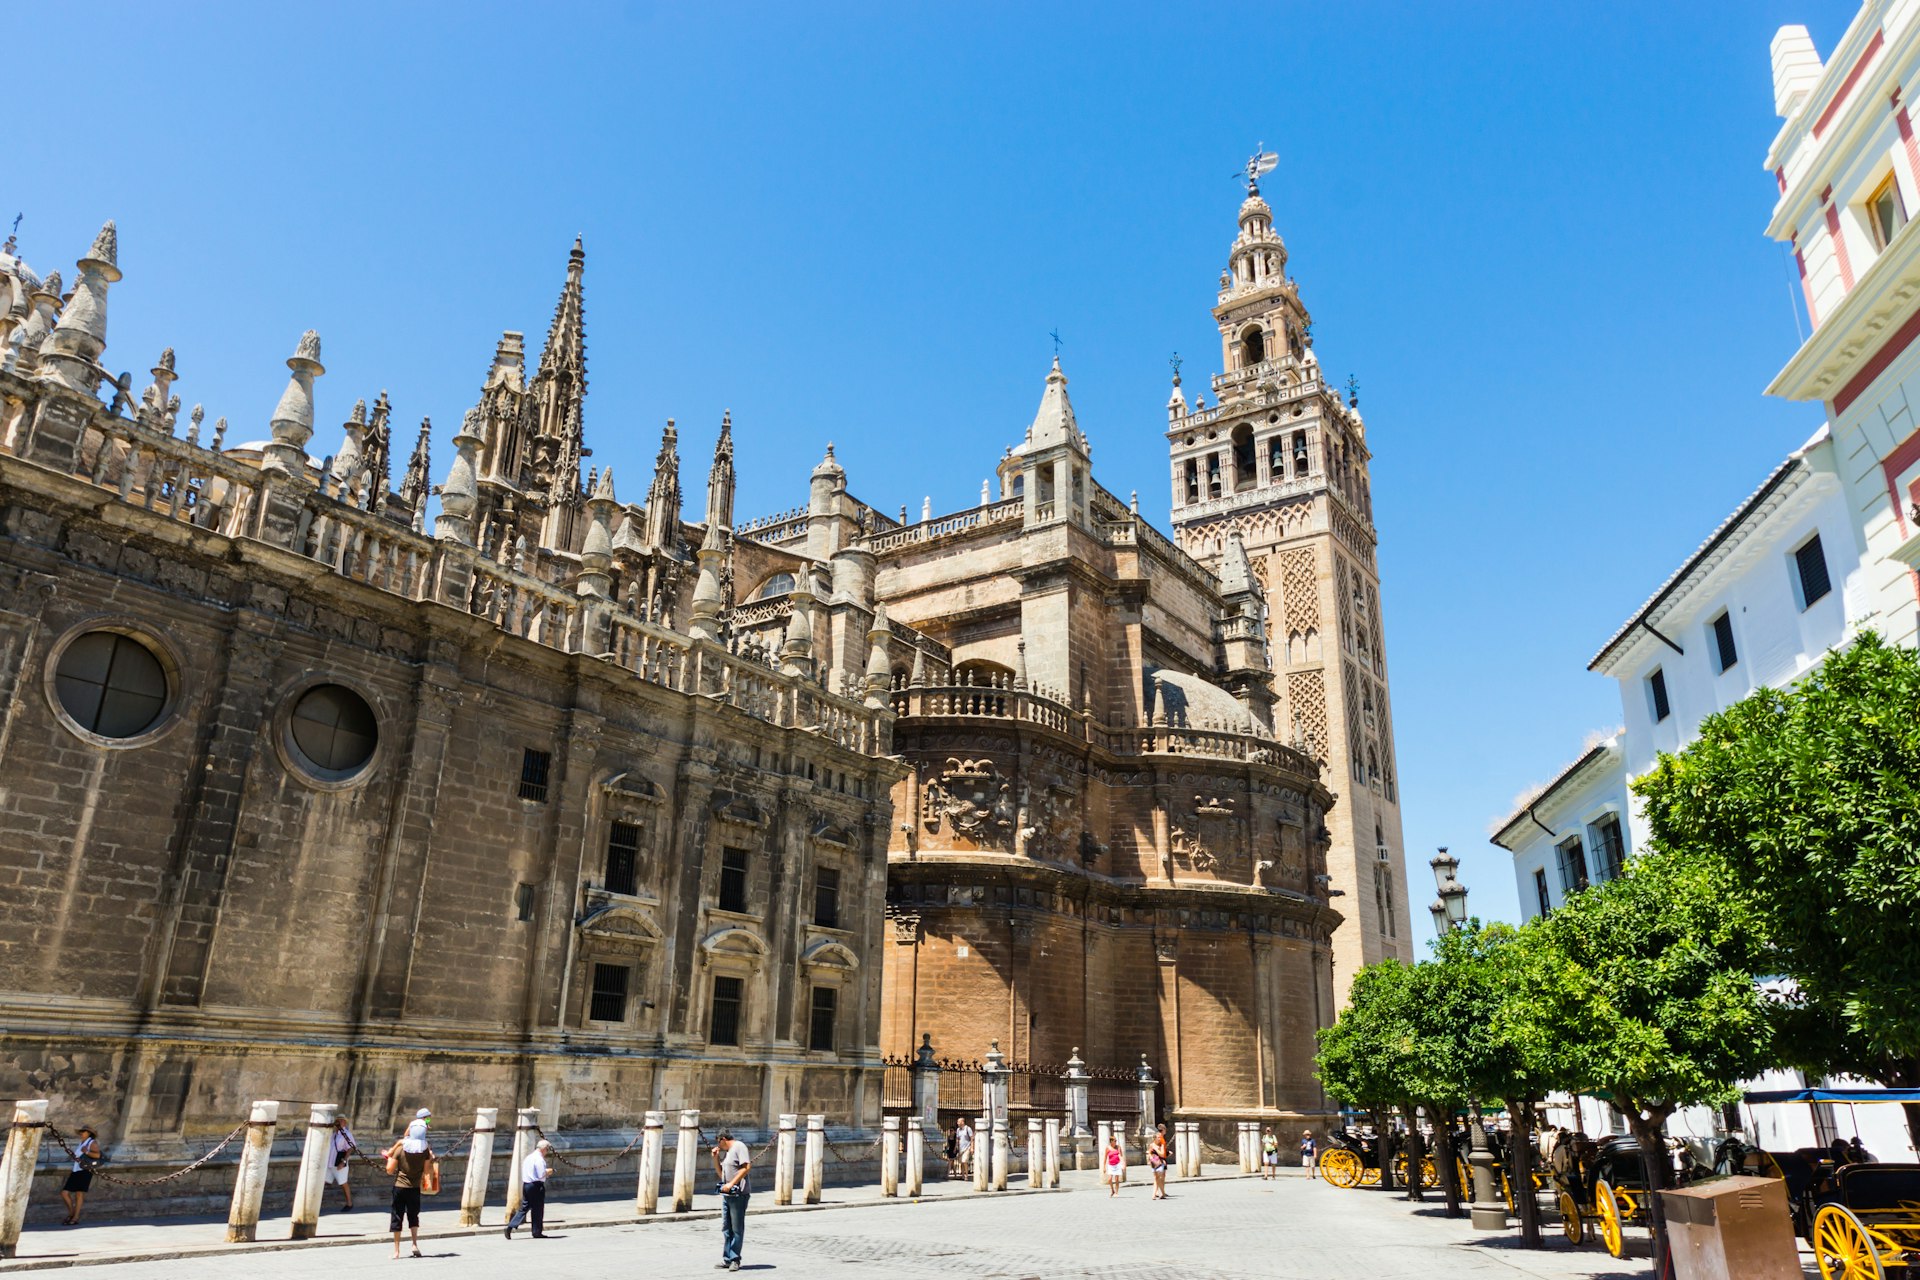 The huge Gothic exterior of Seville's Cathedral; at one end is its Giralda bell tower, resembling a minaret with a delicate brick-pattern decoration.